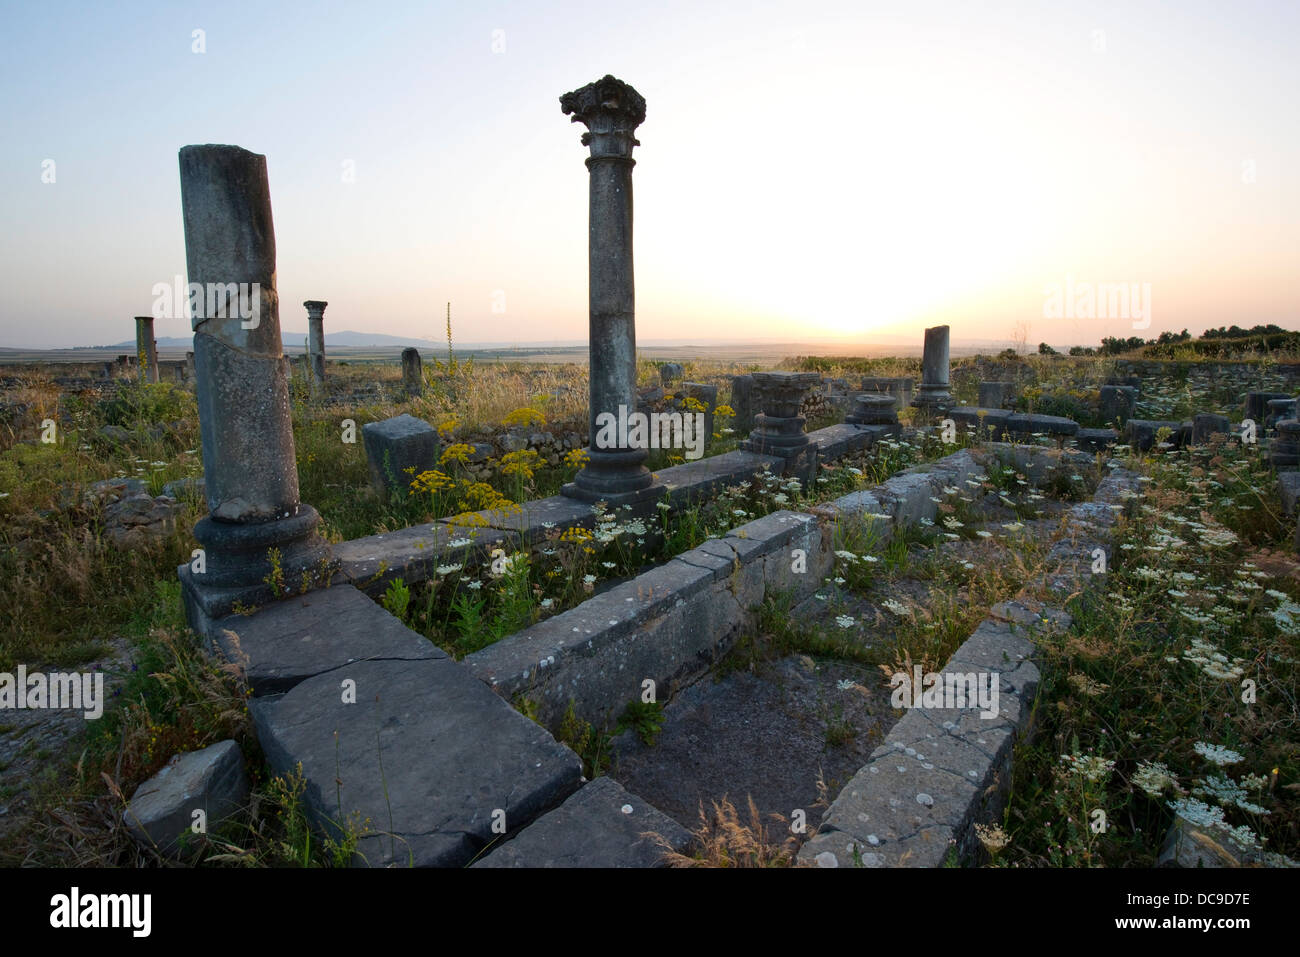 Ancient Roman ruins at sunset at the partially excavated Roman city of Volubilis near Meknes, Morocco. Stock Photo